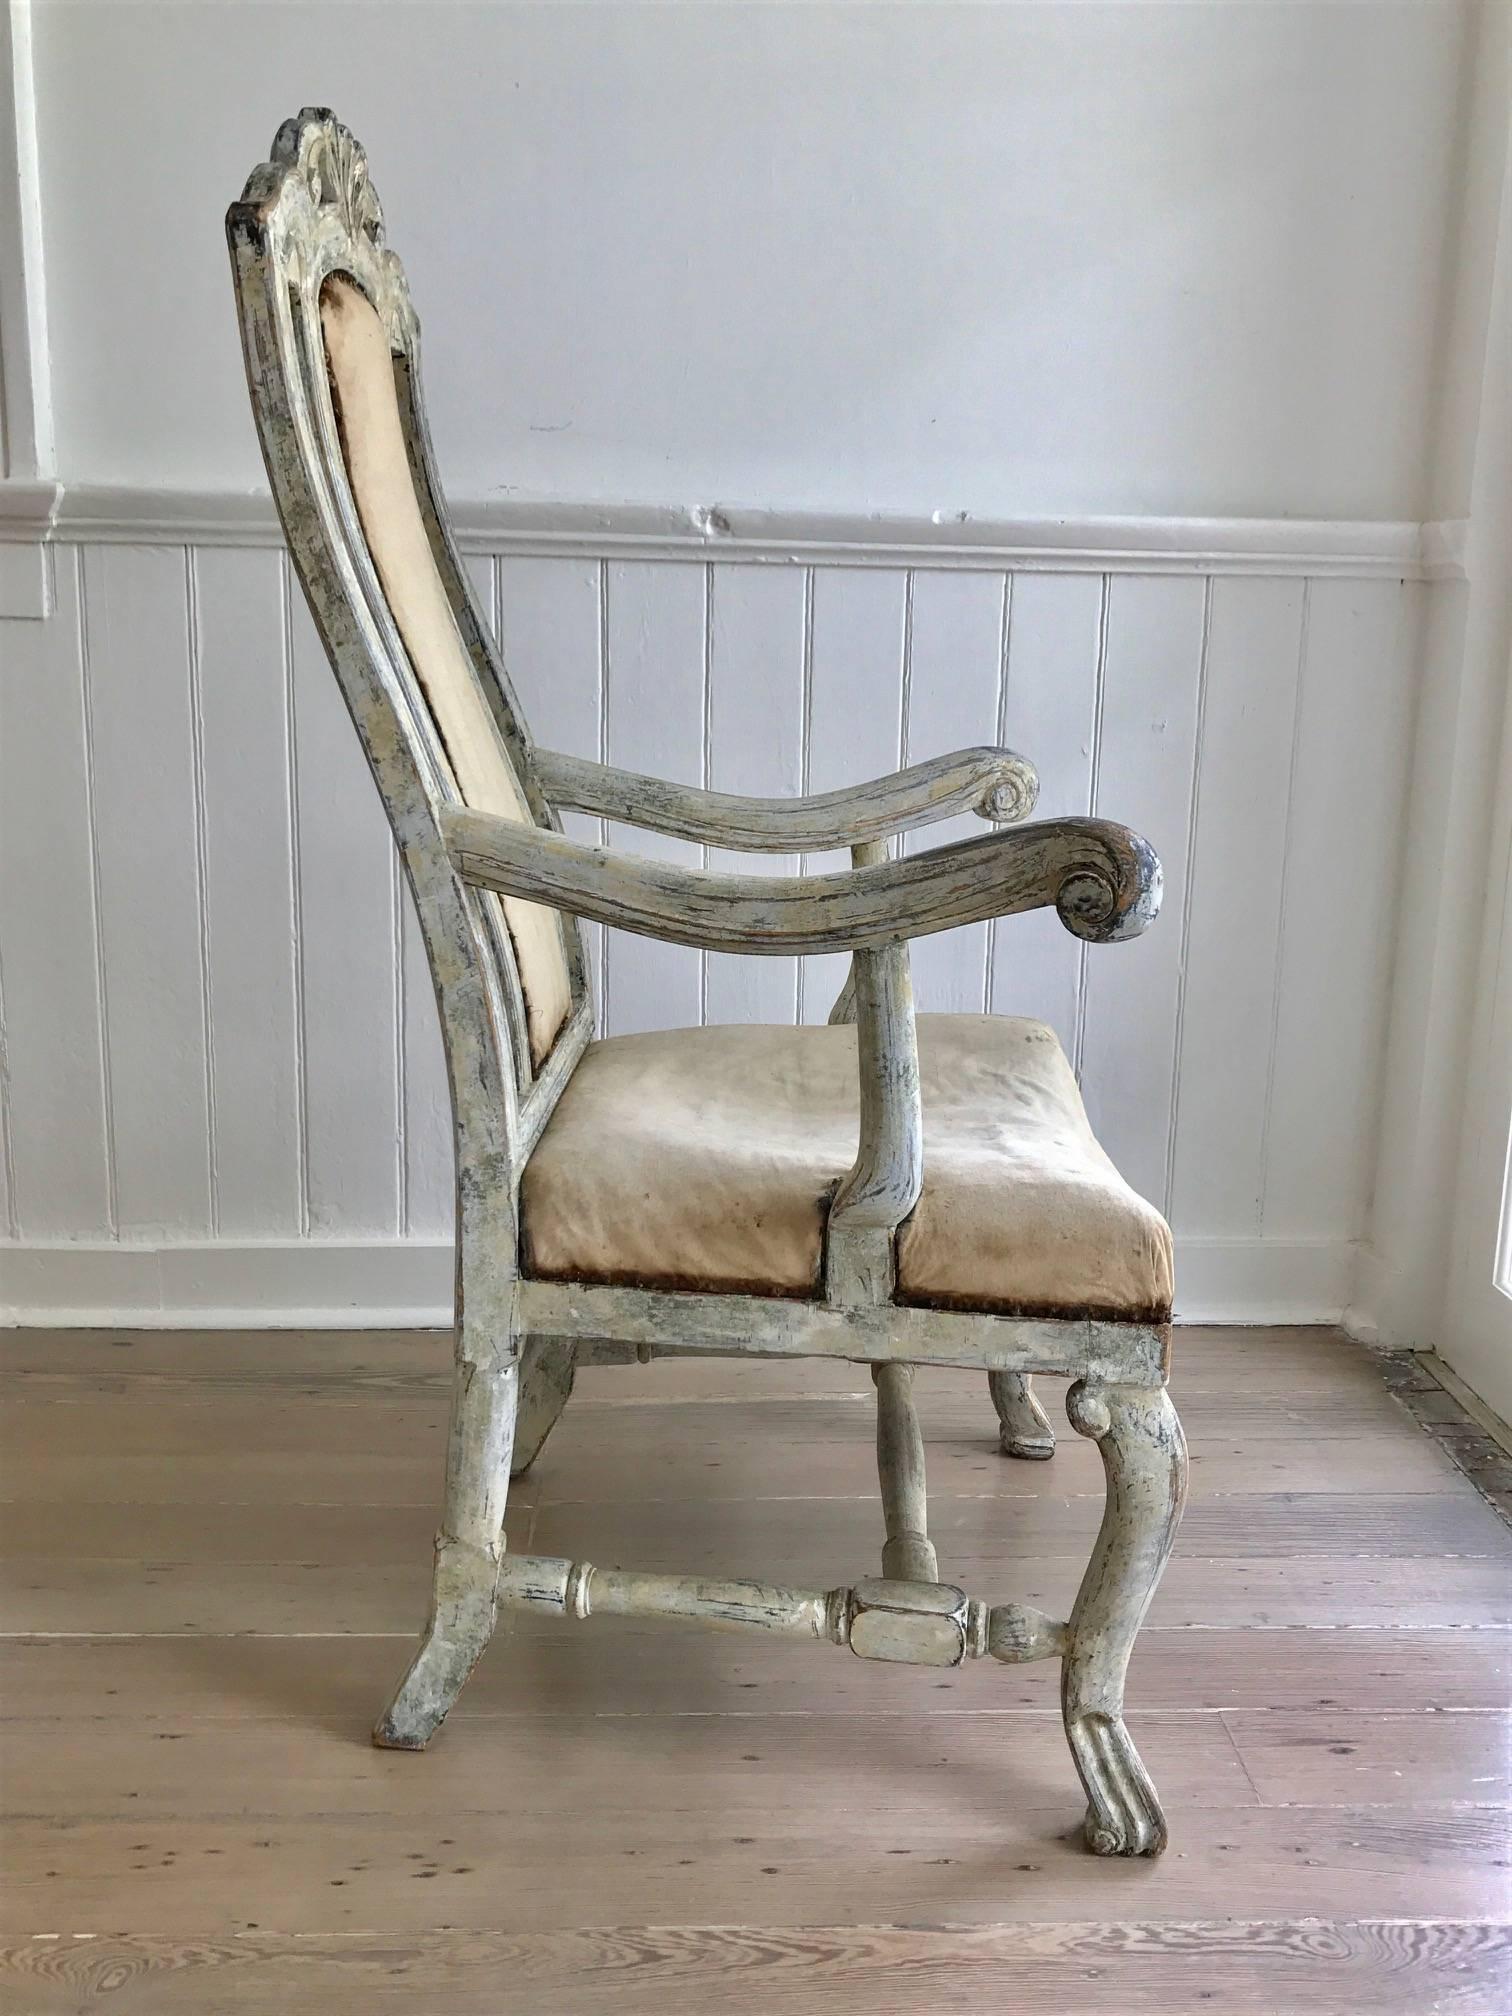 Robustly styled and carved Swedish Baroque armchair with original cream colored paint, now worn to a very attractive patina; the crest rail and seat skirt expressively detailed; turned h-shaped stretchers; upholstered back splat and seat.